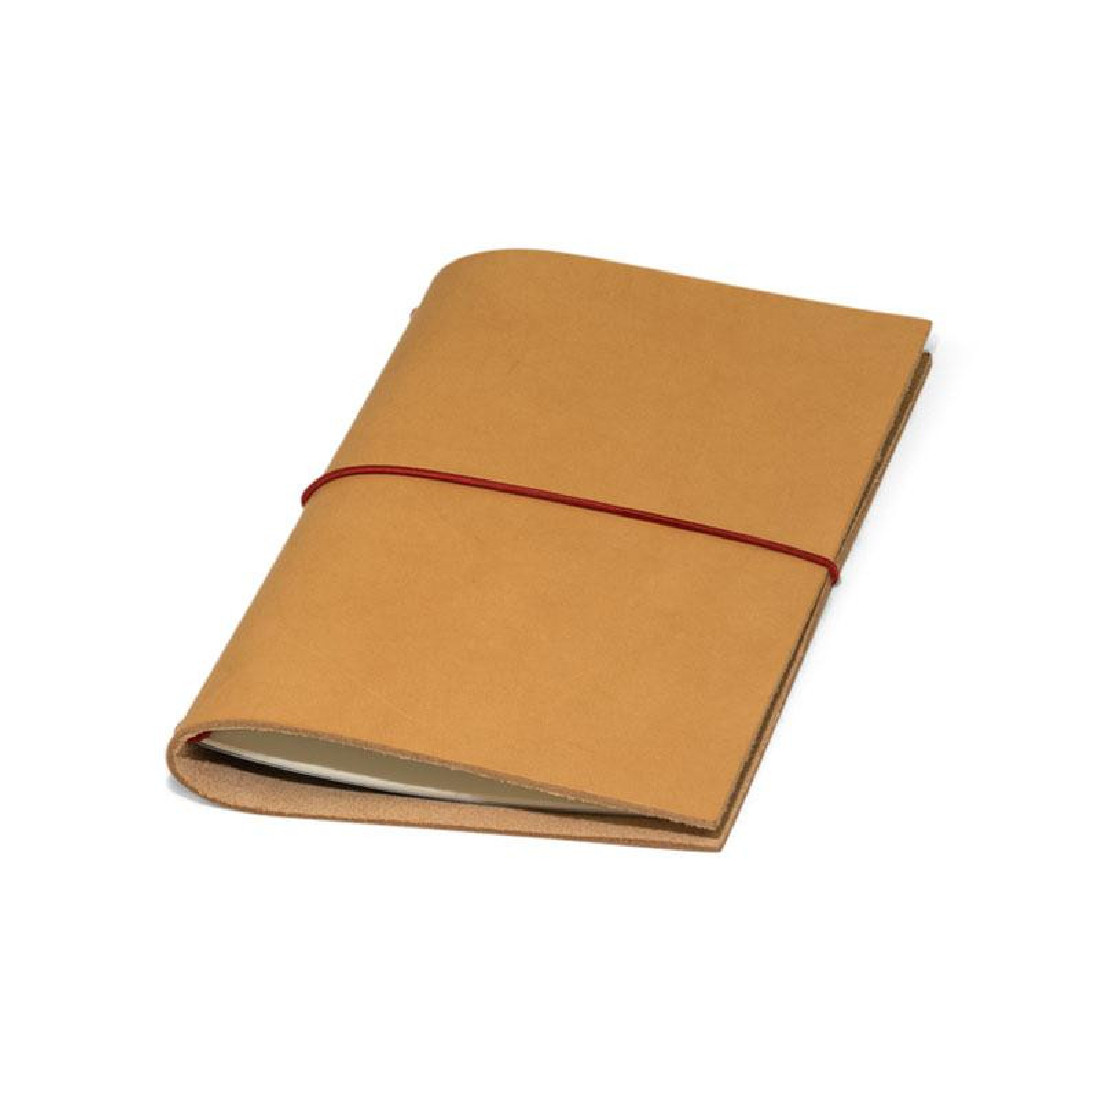 Paper Republic the writers essentials pocket sand  leather journal kit